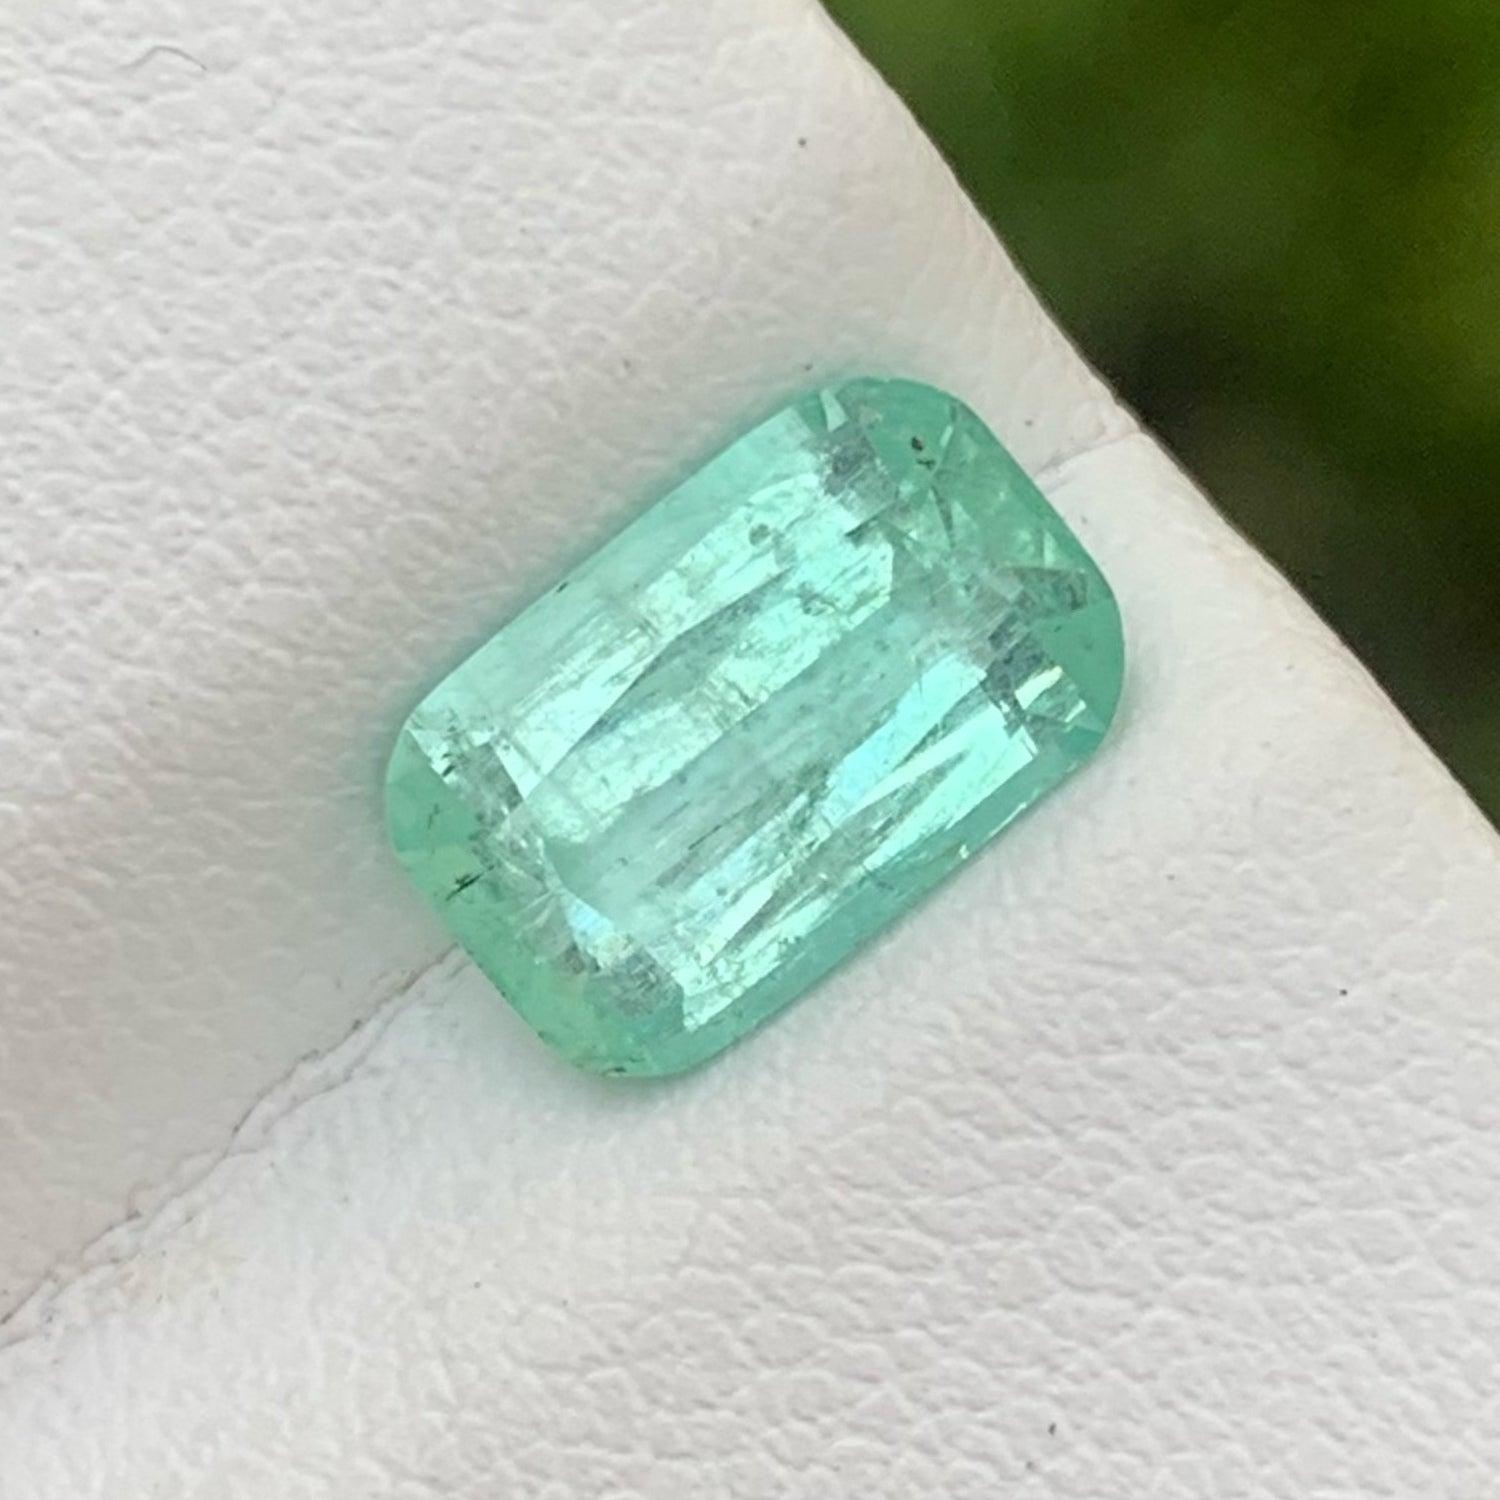 Cushion Cut Natural Pastel Green Emerald Stone 1.95 Carats Gemstone for Jewelry Making For Sale